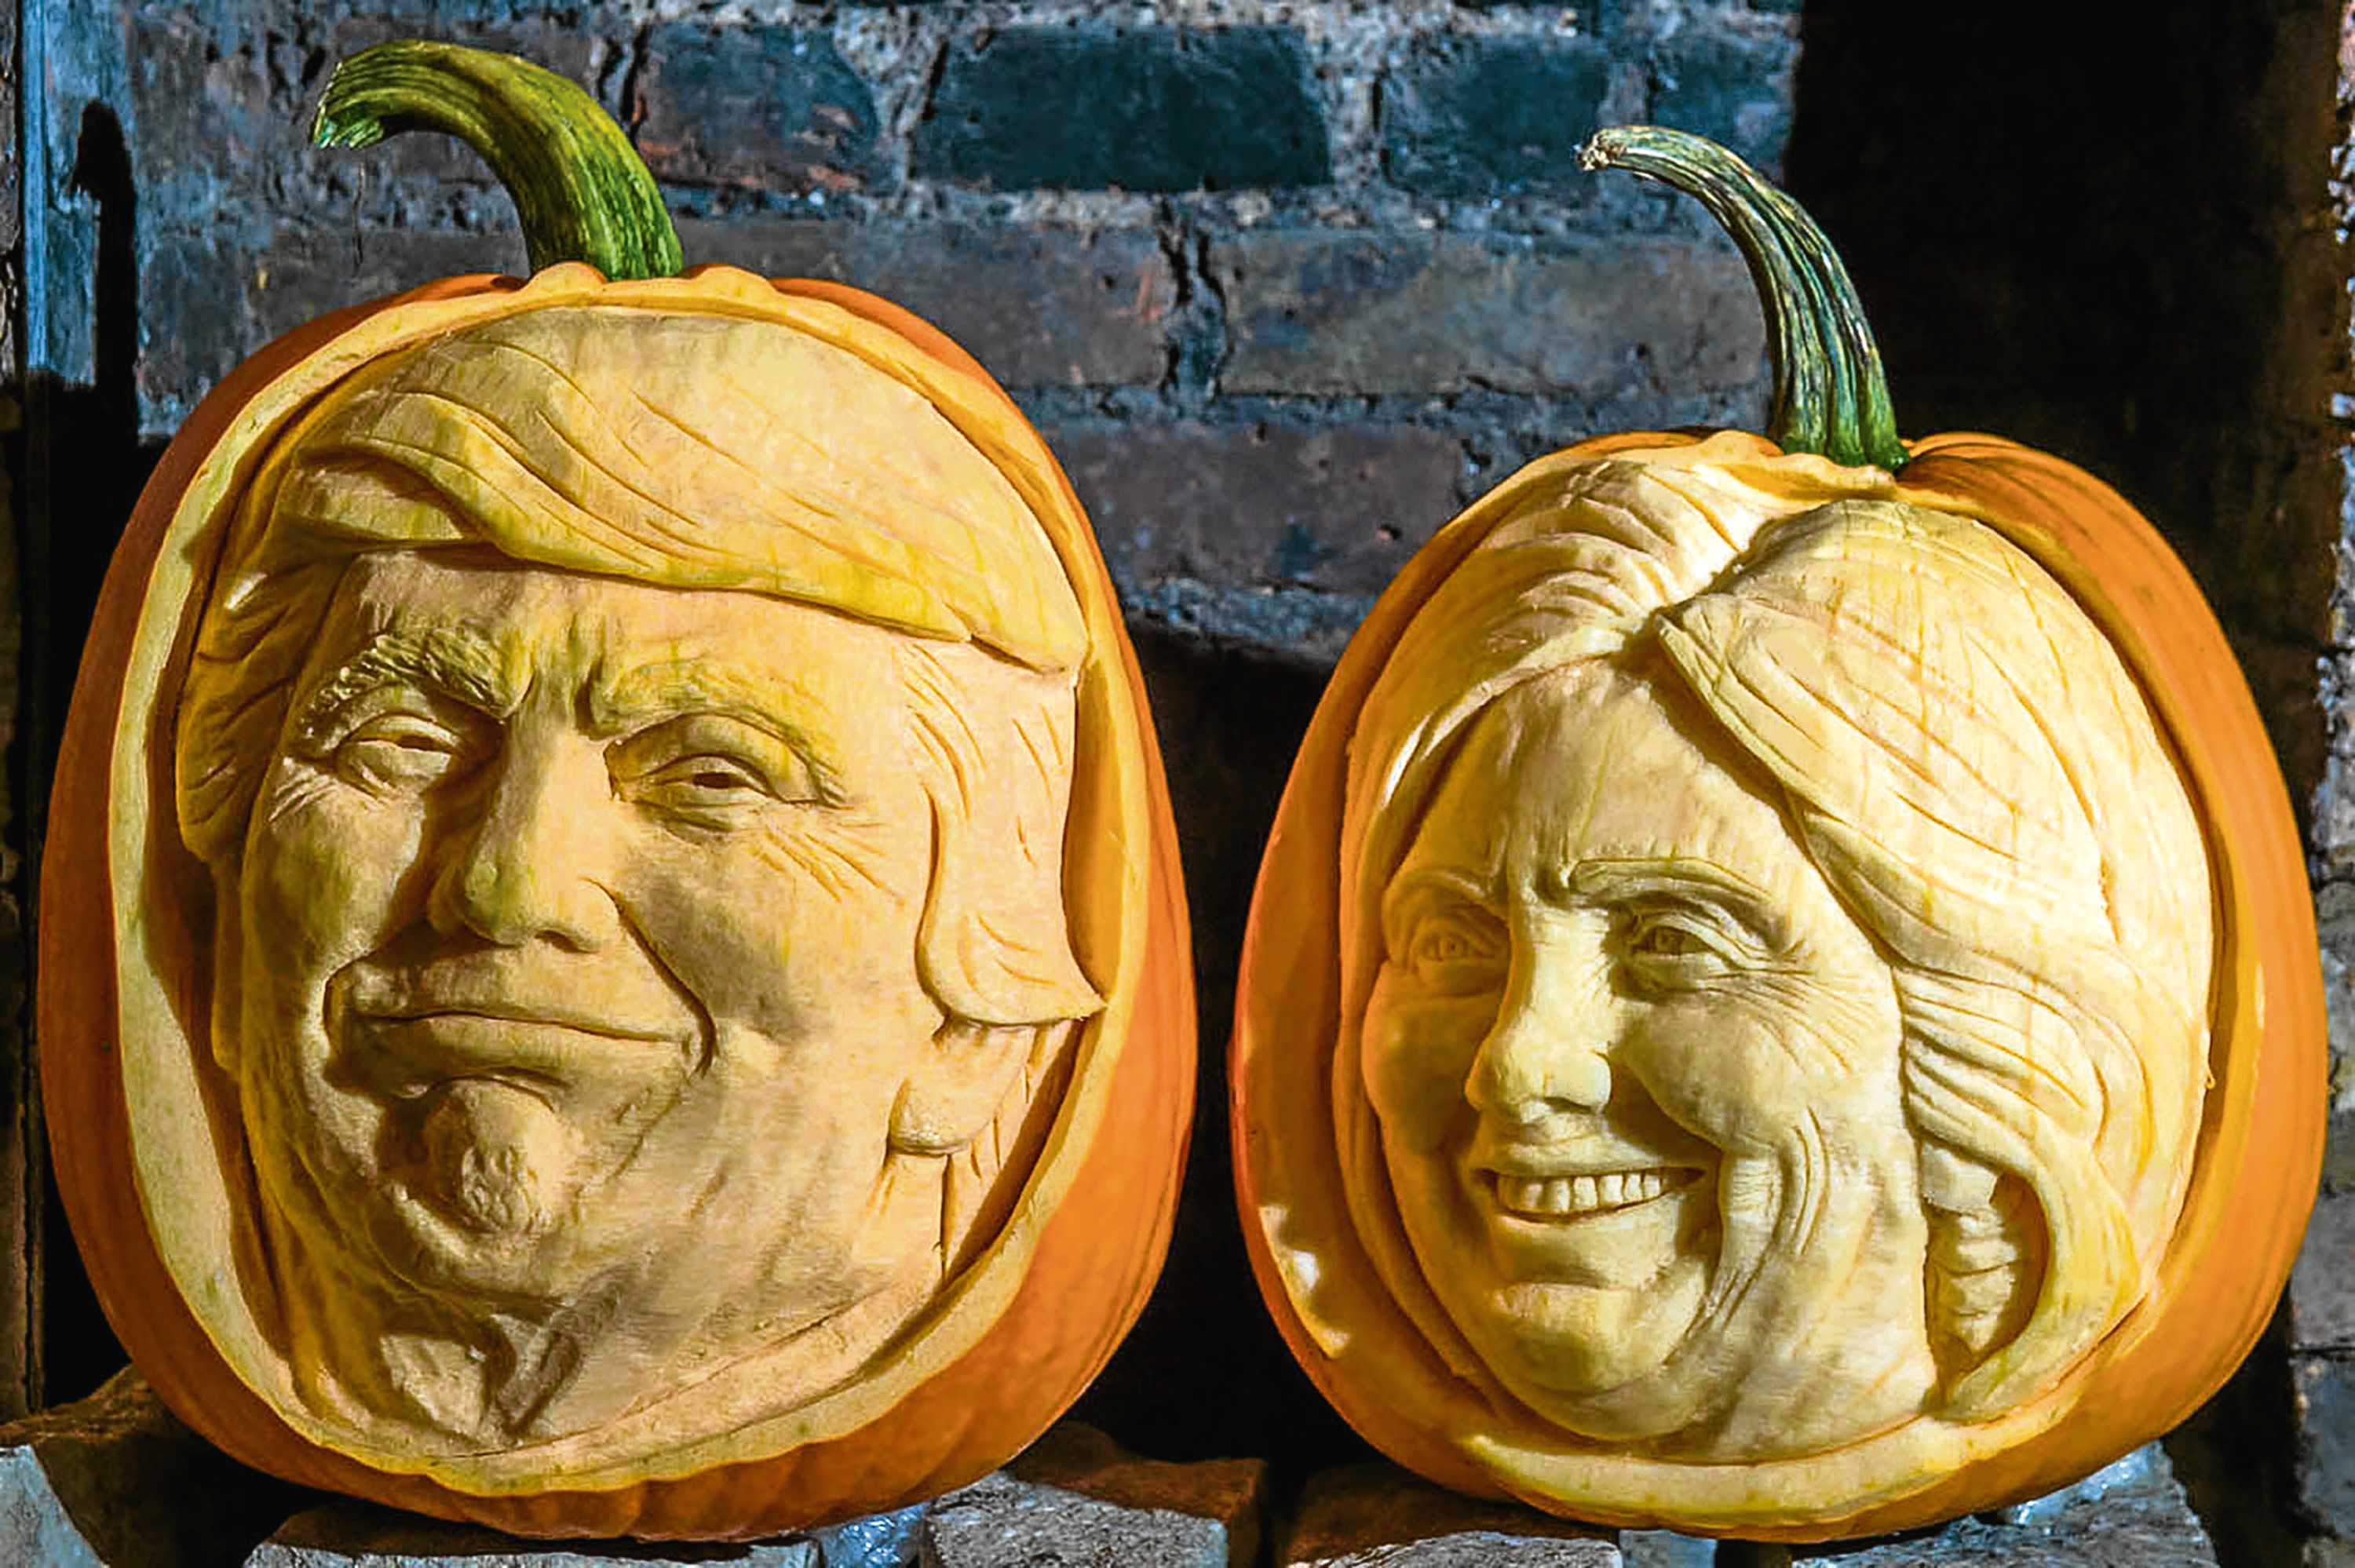 To celebrate National Pumpkin Day on Wednesday 26th Oct, Sainsburyâ¬"s commissioned pumpkin carvings of three of the most currently recognised faces - Donald Trumpkin, Hil-eerie Clinton and Simon Howl.